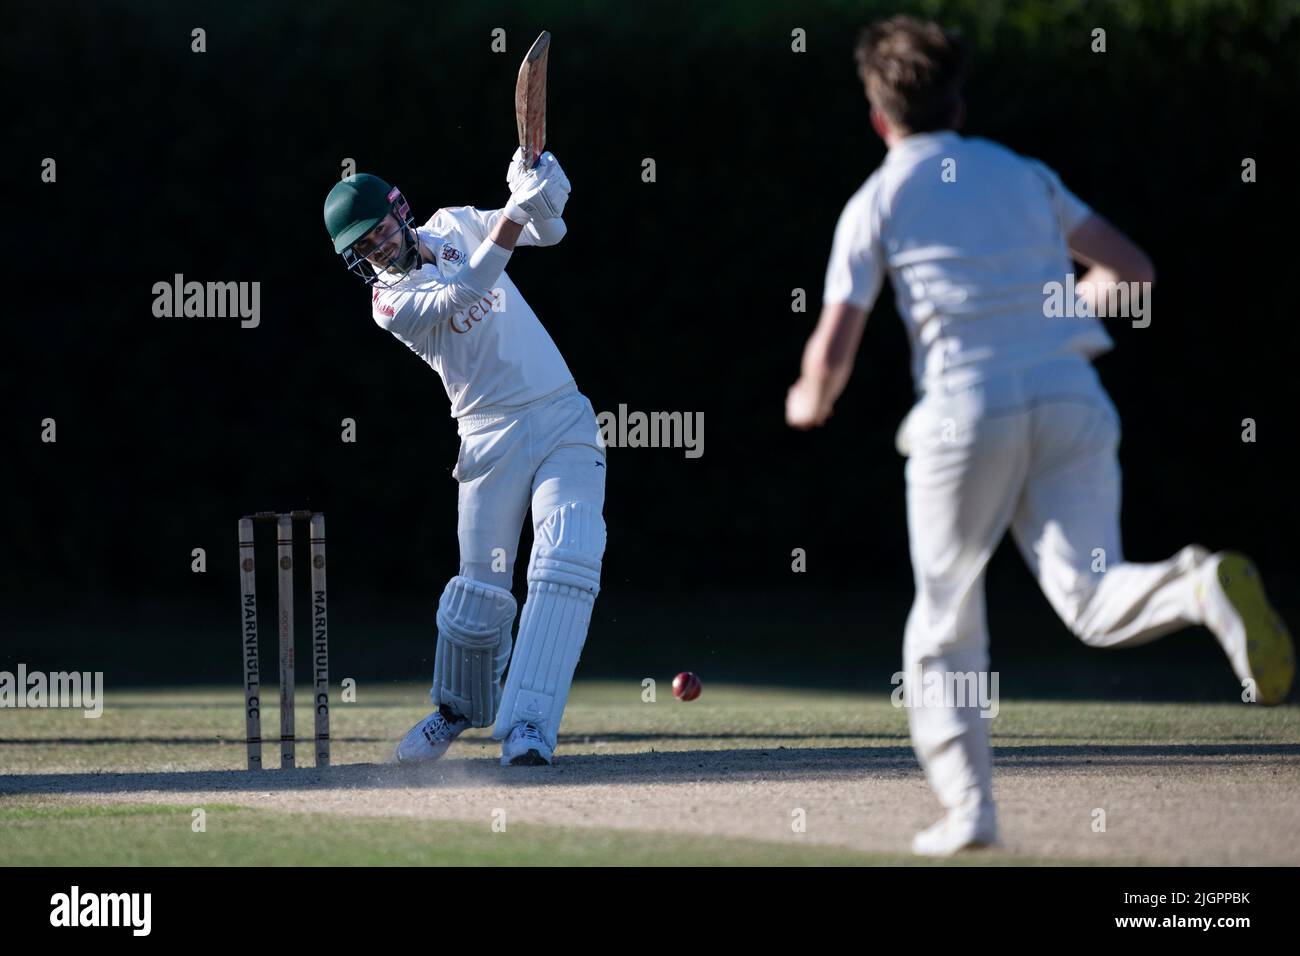 Cricket batter in action Stock Photo